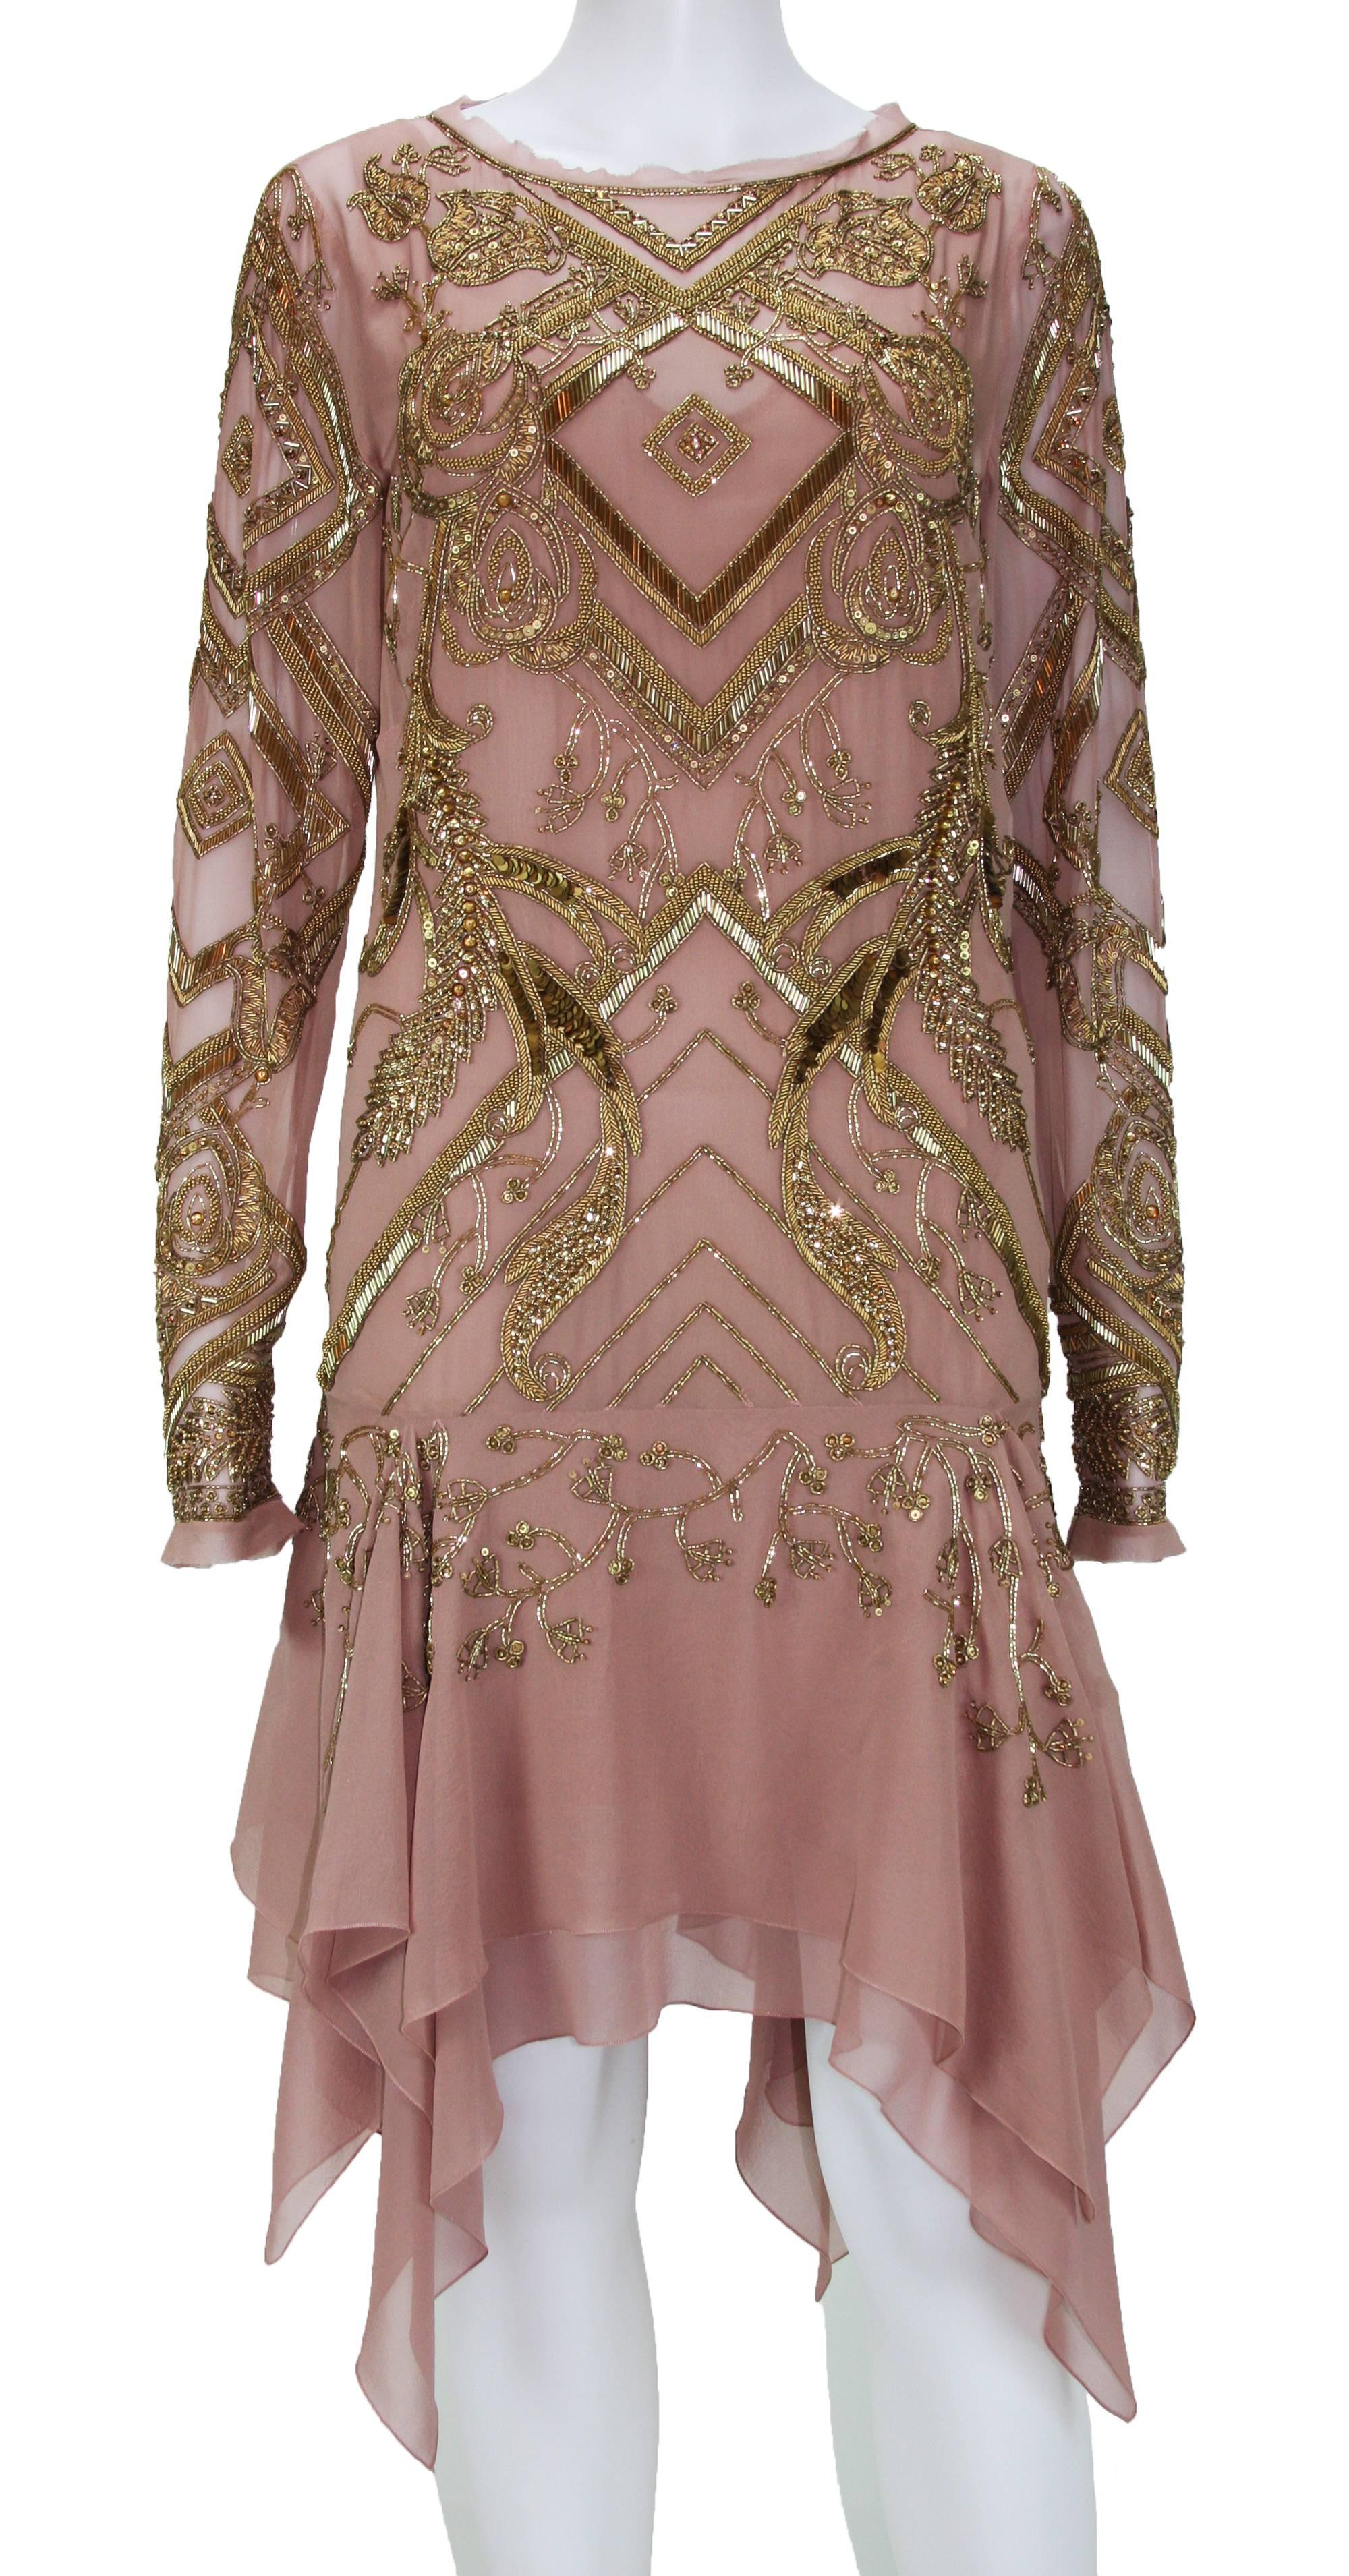 New EMILIO PUCCI Fully Beaded Silk Cocktail Dress
Italian Size 42 - US 6
100% Silk, Color – Skin / Tan
Gold -Tone Beads, Sequins, Threads + Crystals.
Double-Layered, Comes with a Slip, Button Closure at Back.
Measurements: Length about 36 inches,